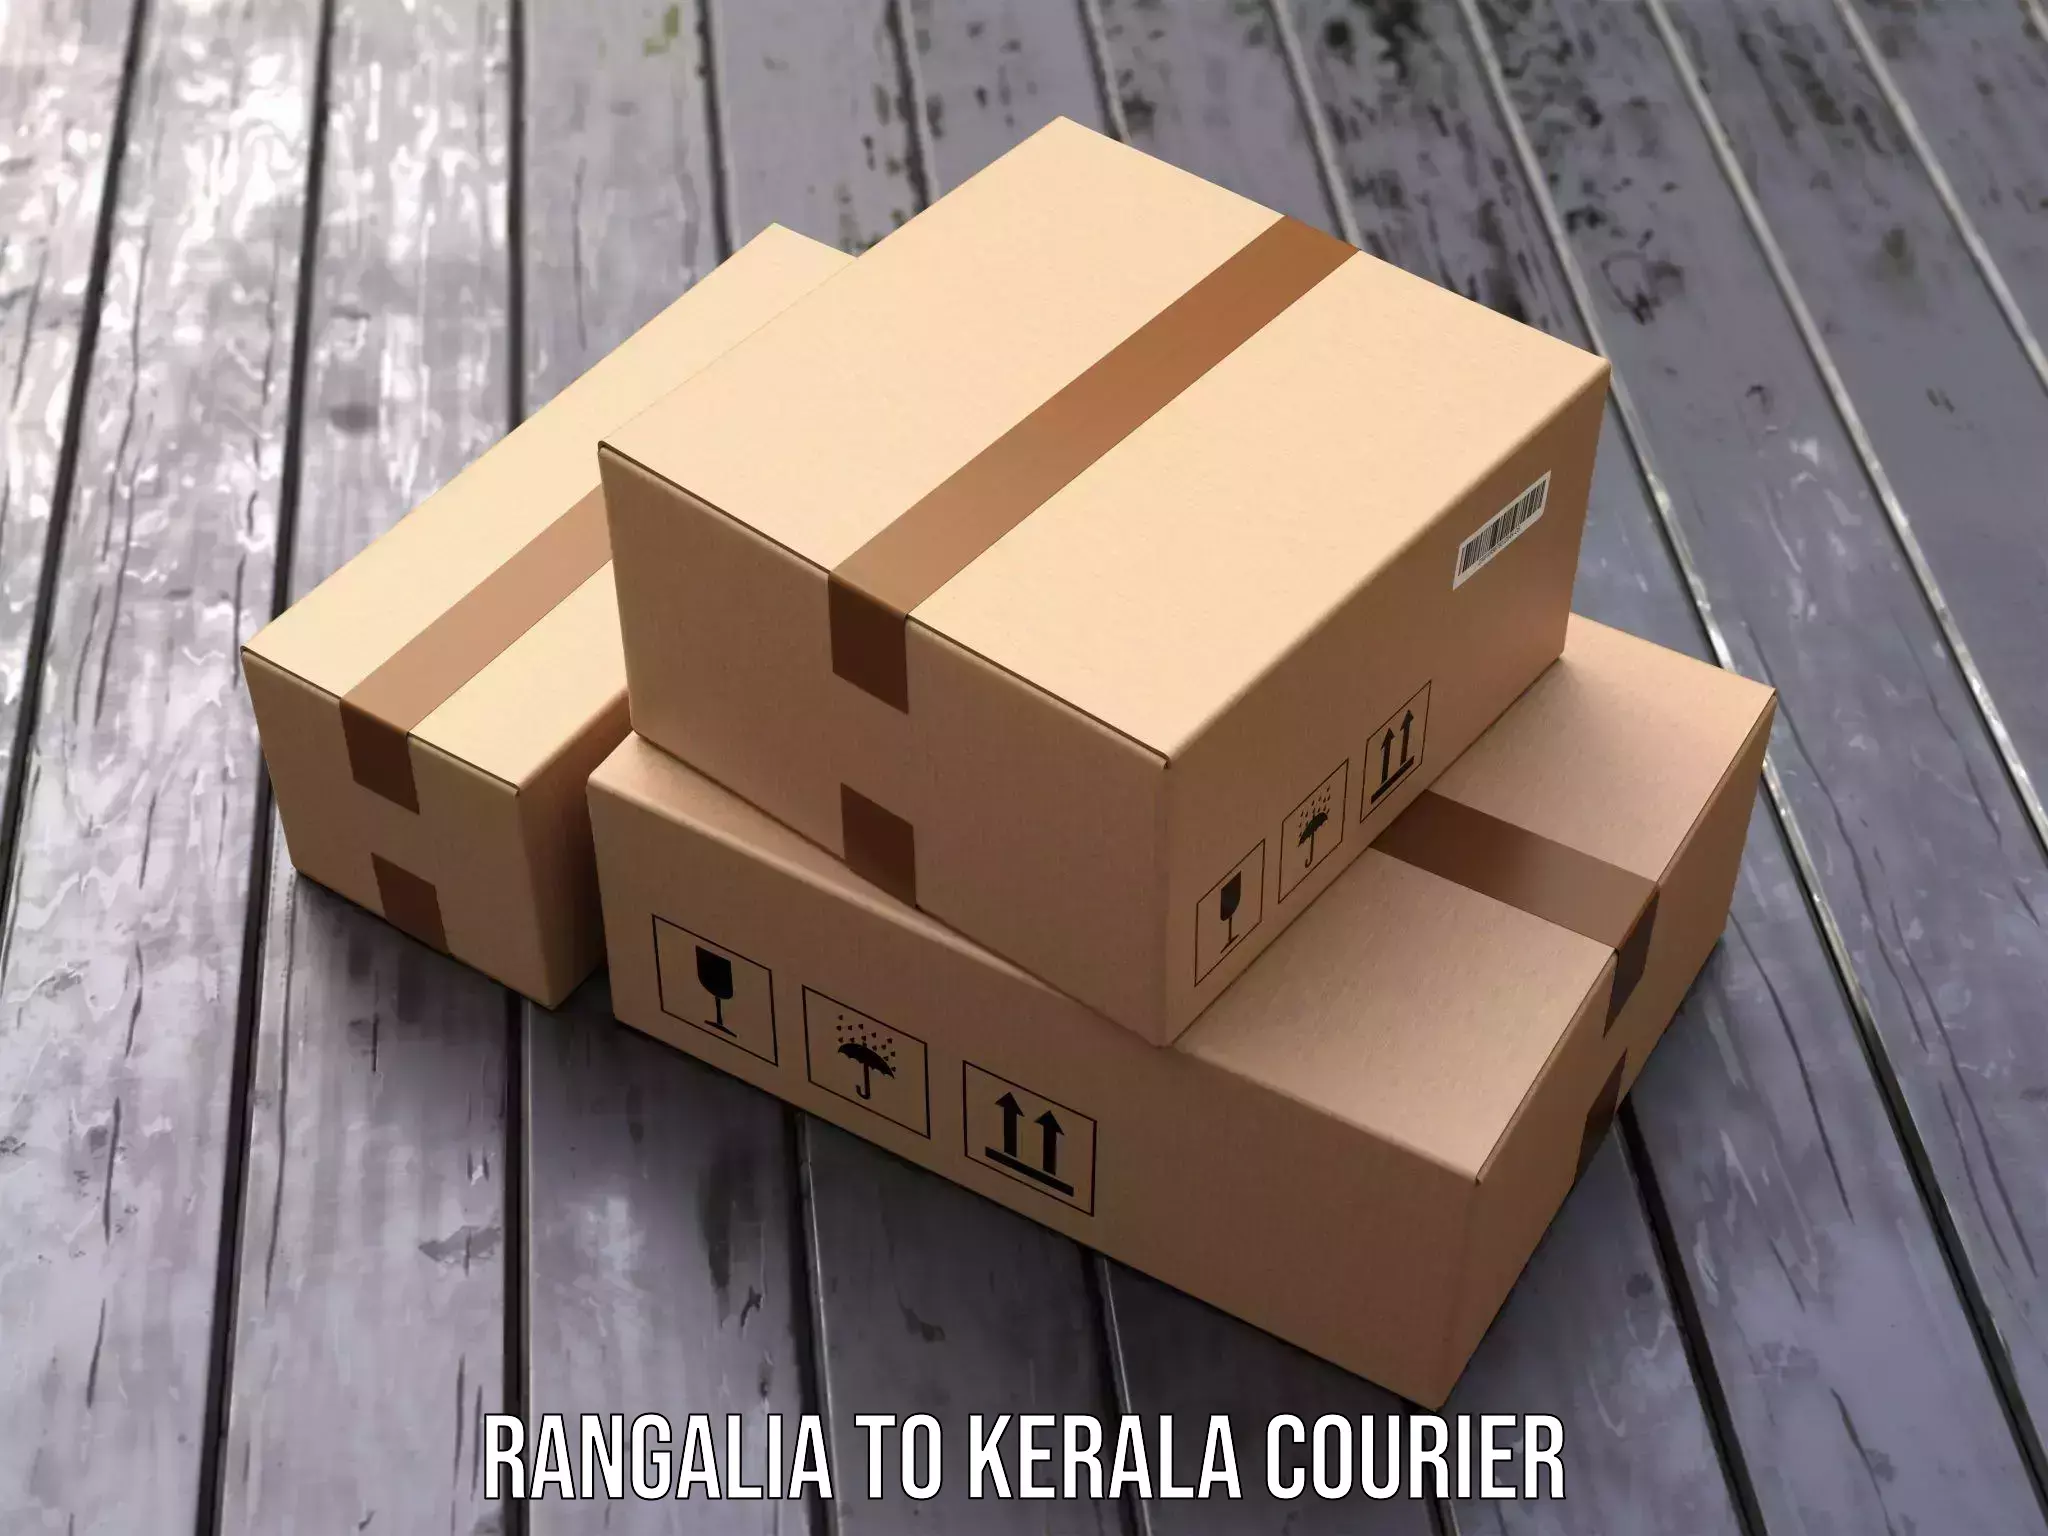 Express delivery solutions Rangalia to Kerala